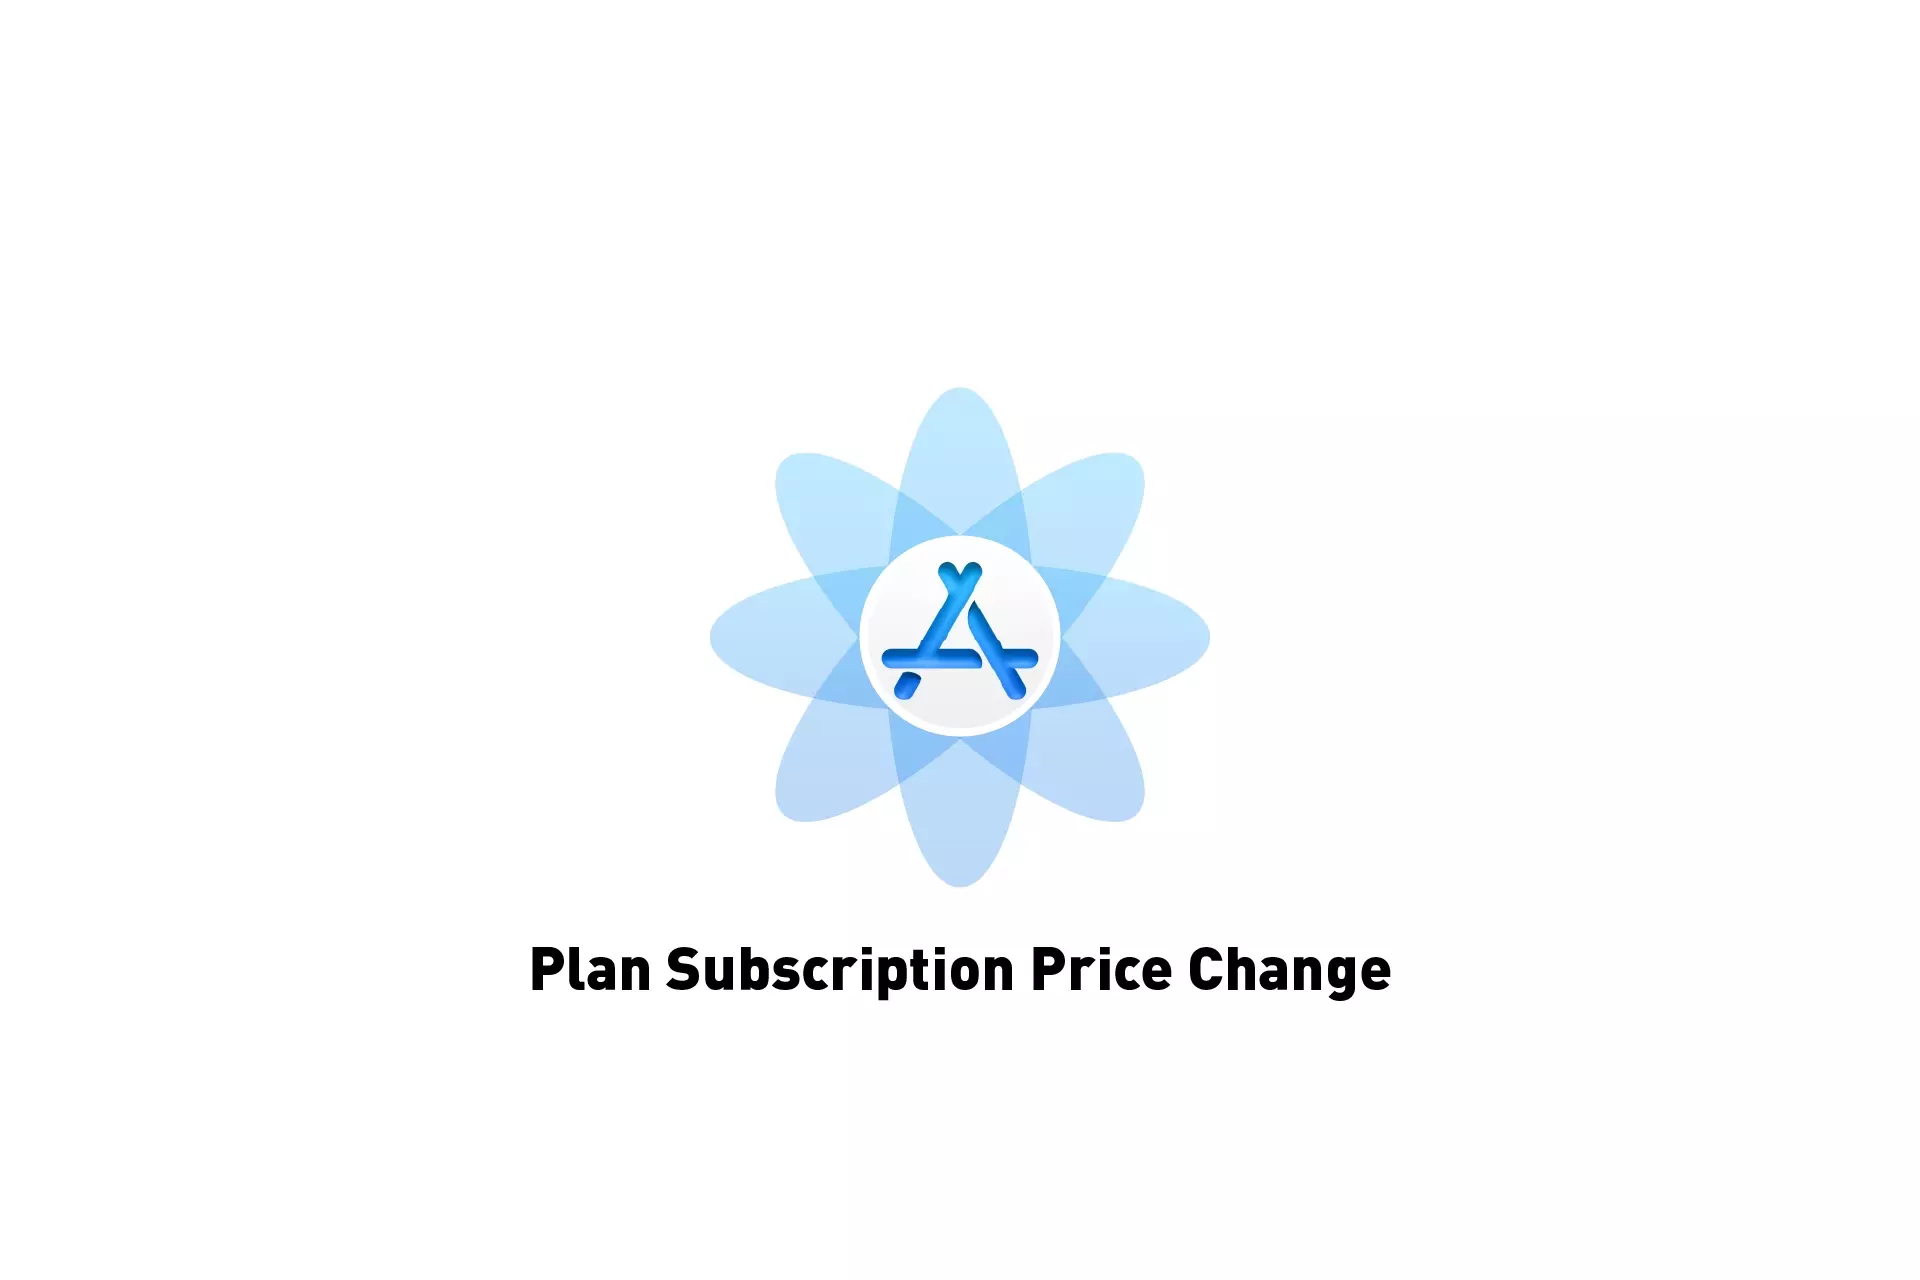 A flower that represents App Store Connect with the text "Plan Subscription Price Change" beneath it.